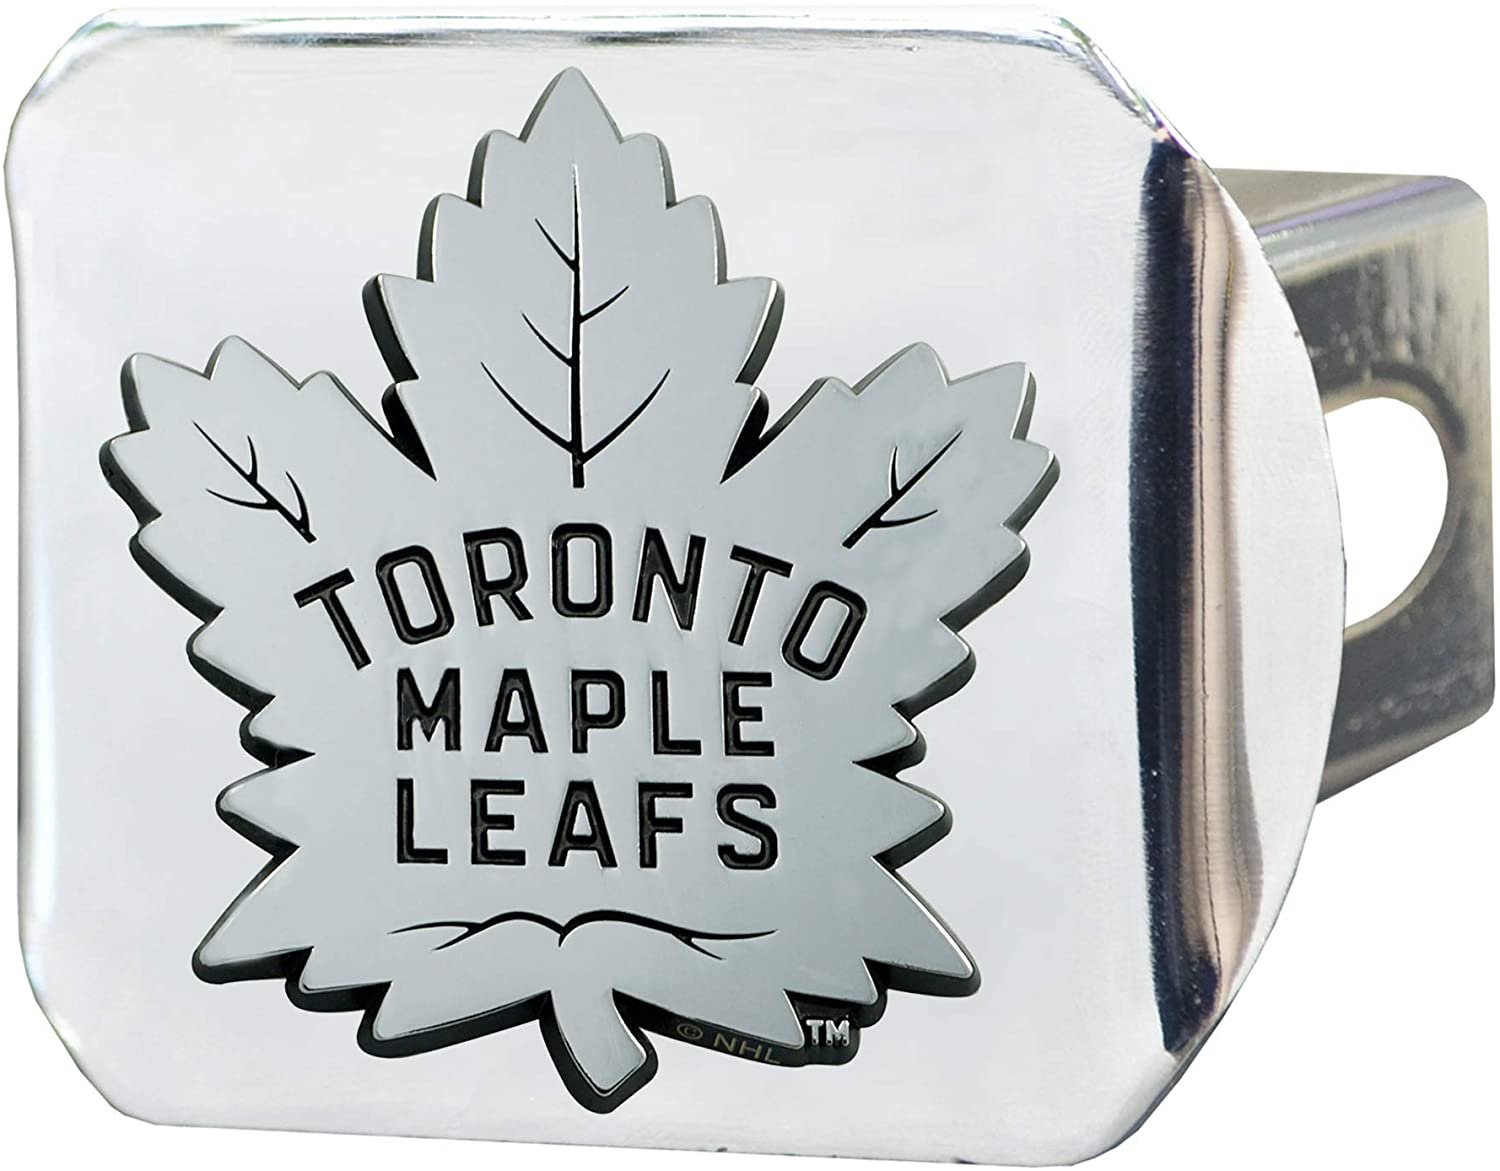 Toronto Maple Leafs Hitch Cover Solid Metal with Raised Chrome Metal Emblem 2" Square Type III